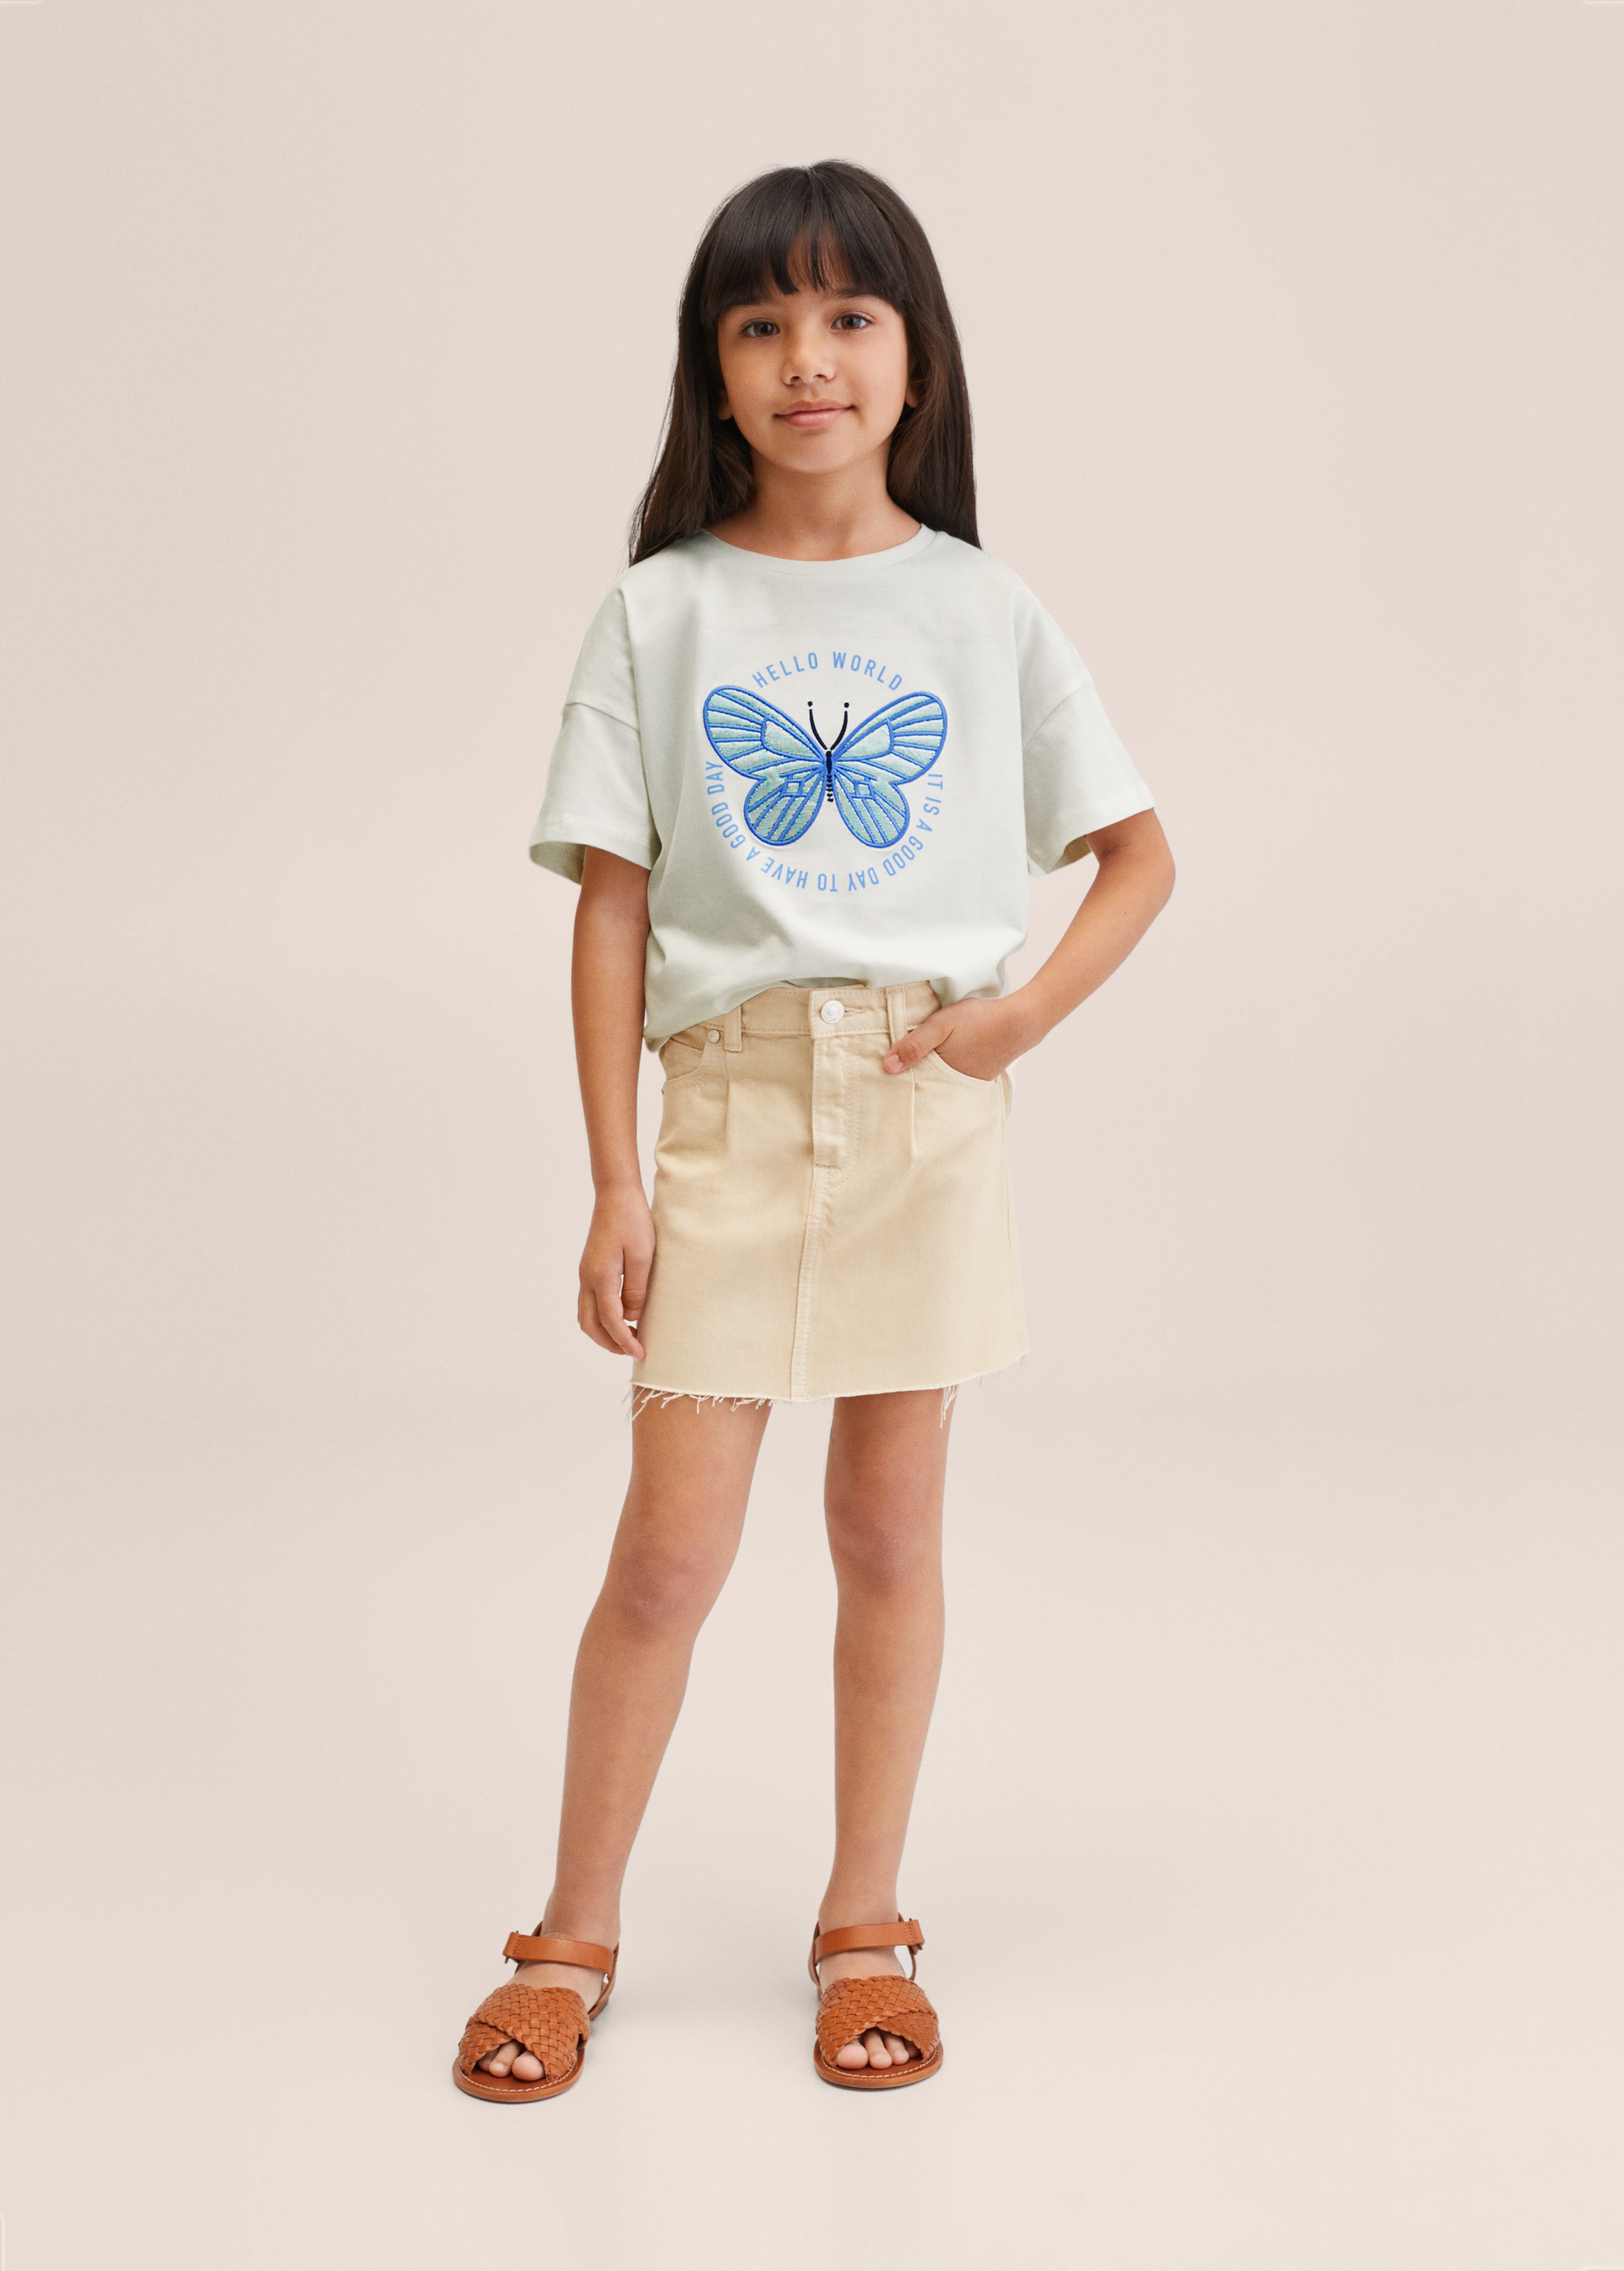 Embroidered butterfly t-shirt - General plane